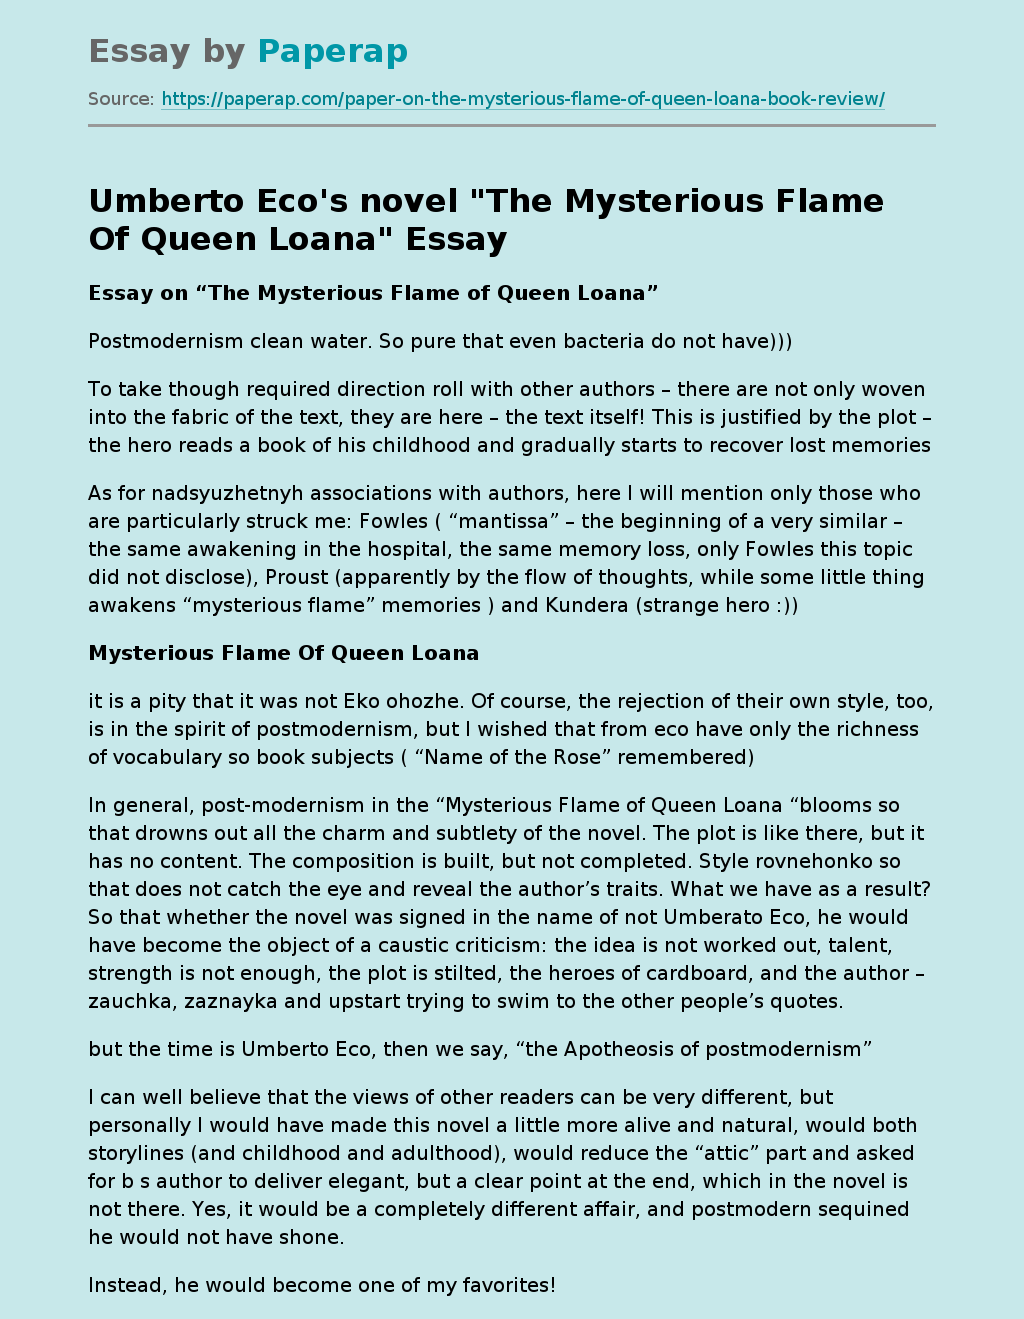 Umberto Eco’s Novel "The Mysterious Flame of Queen Loana"